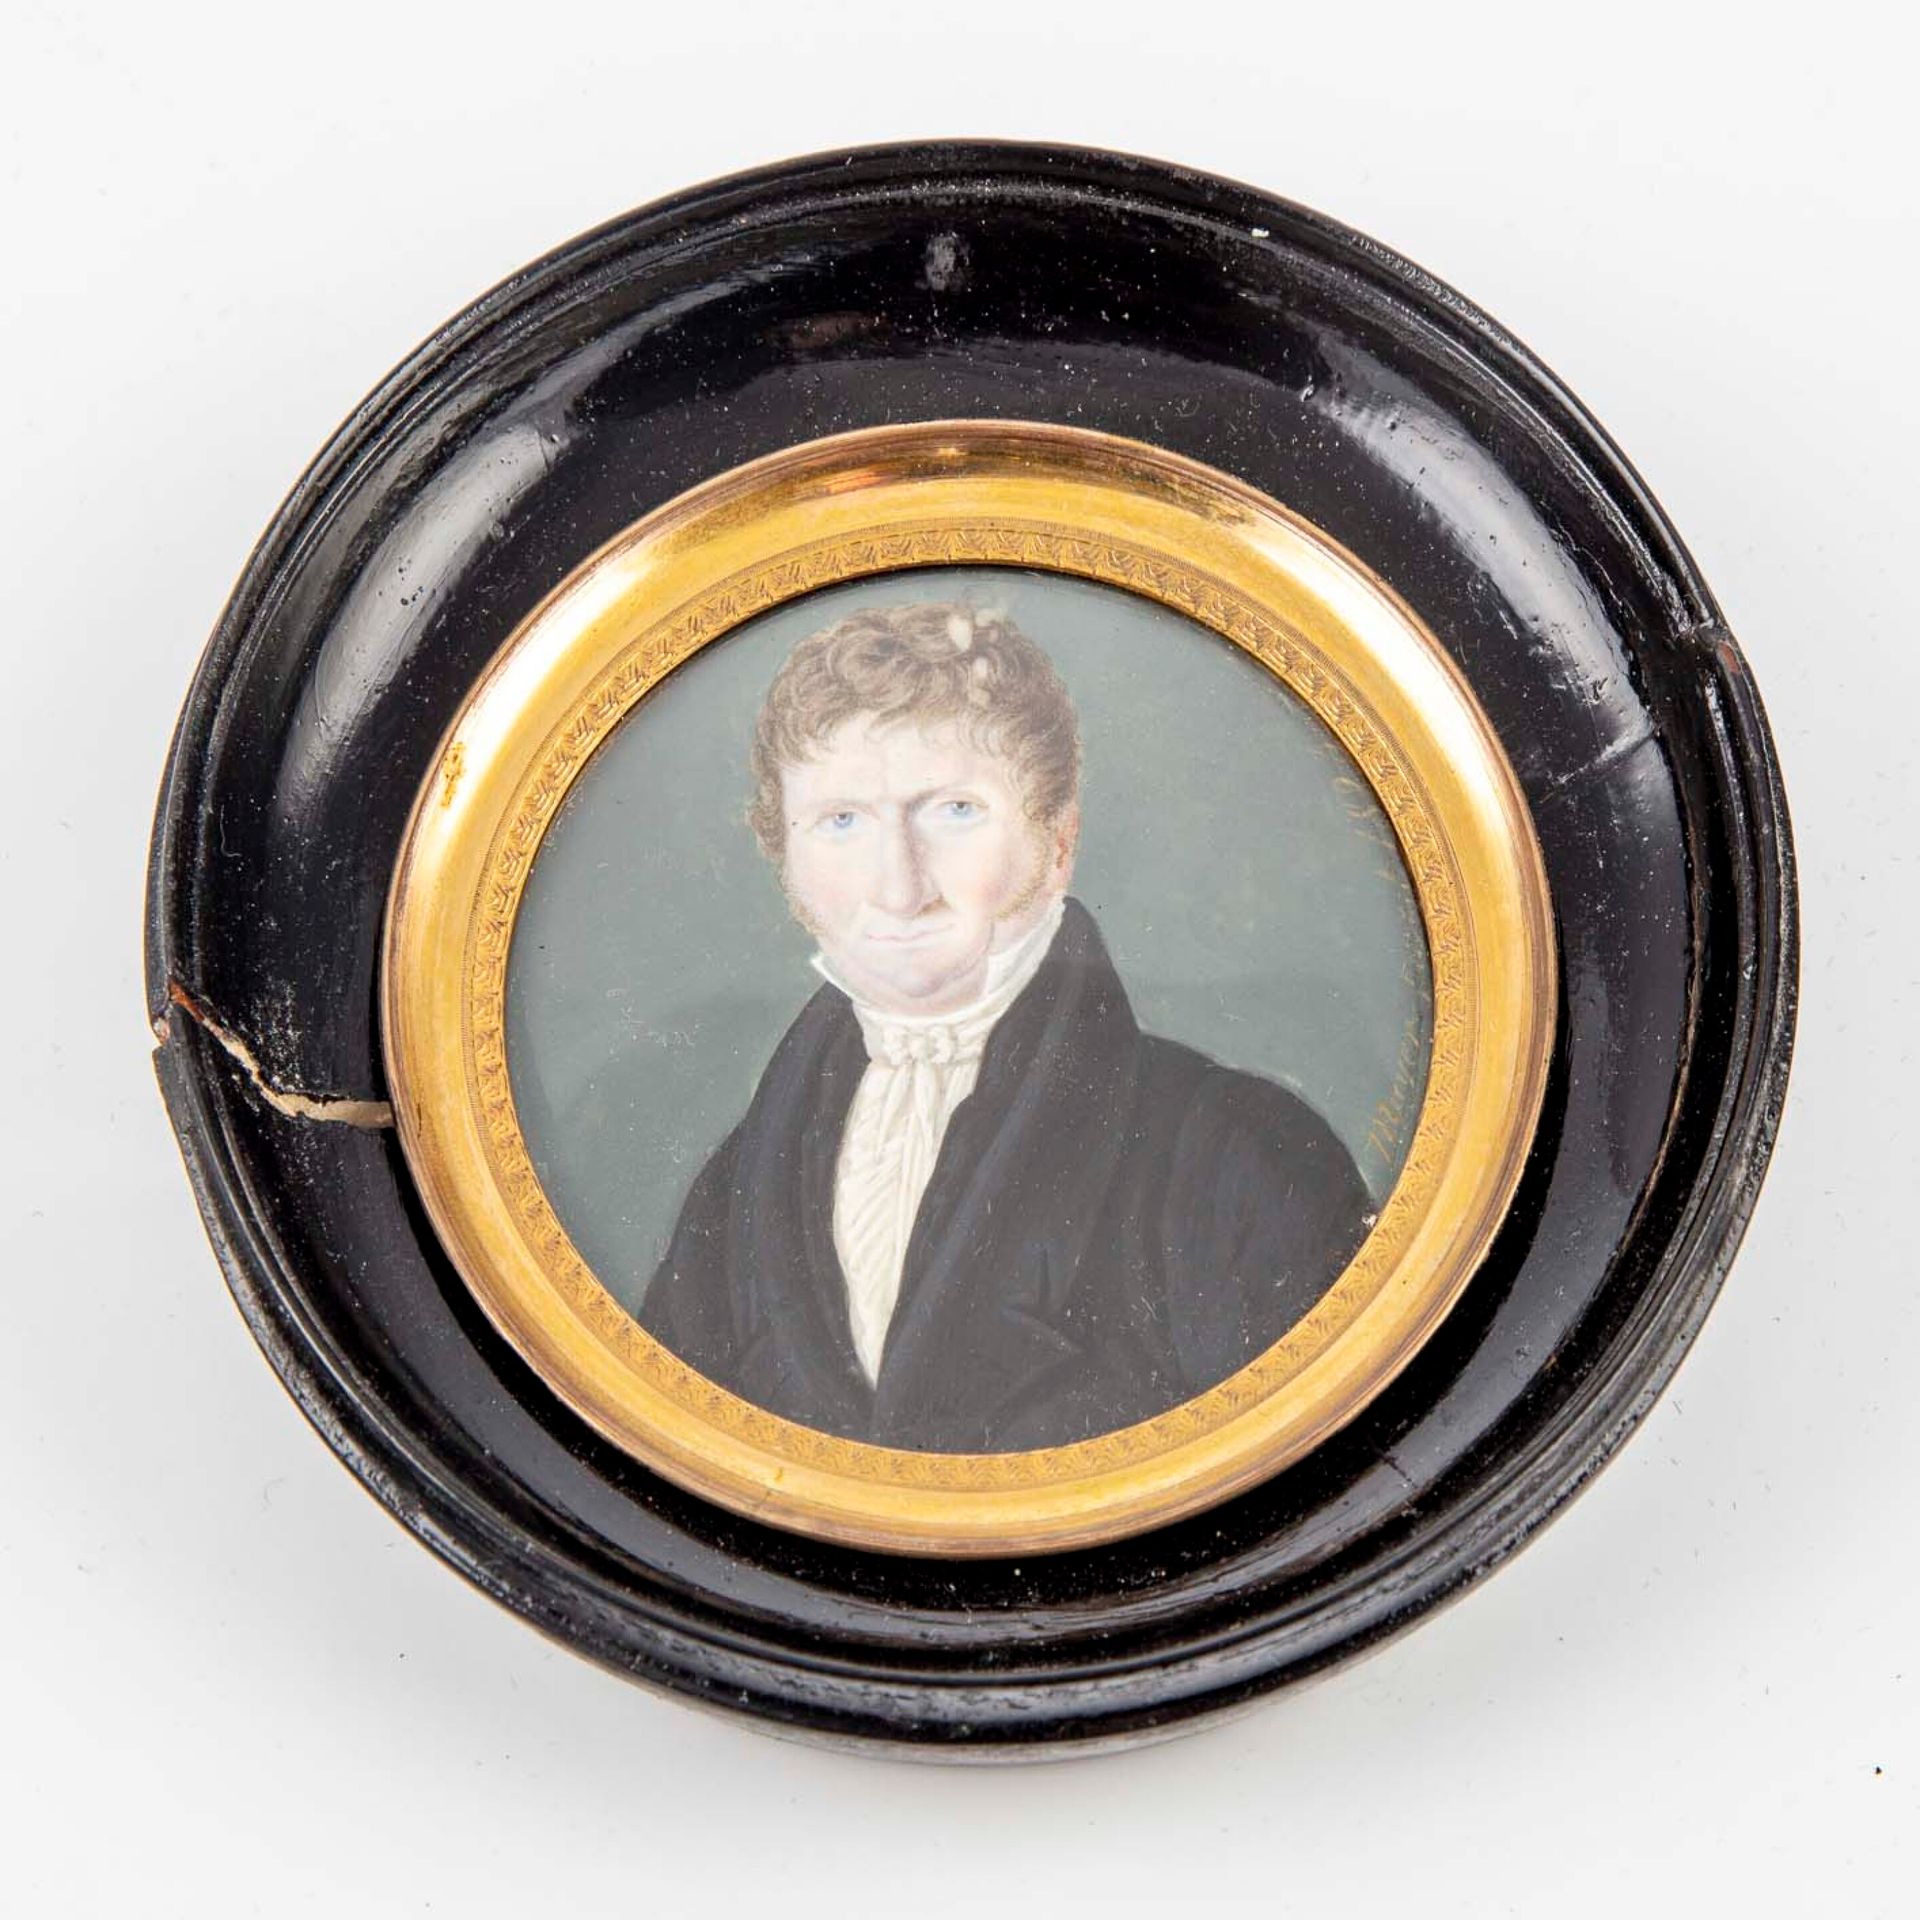 MAYER MAYER - 19th century

Portrait of a man with blue eyes

Miniature with gou&hellip;